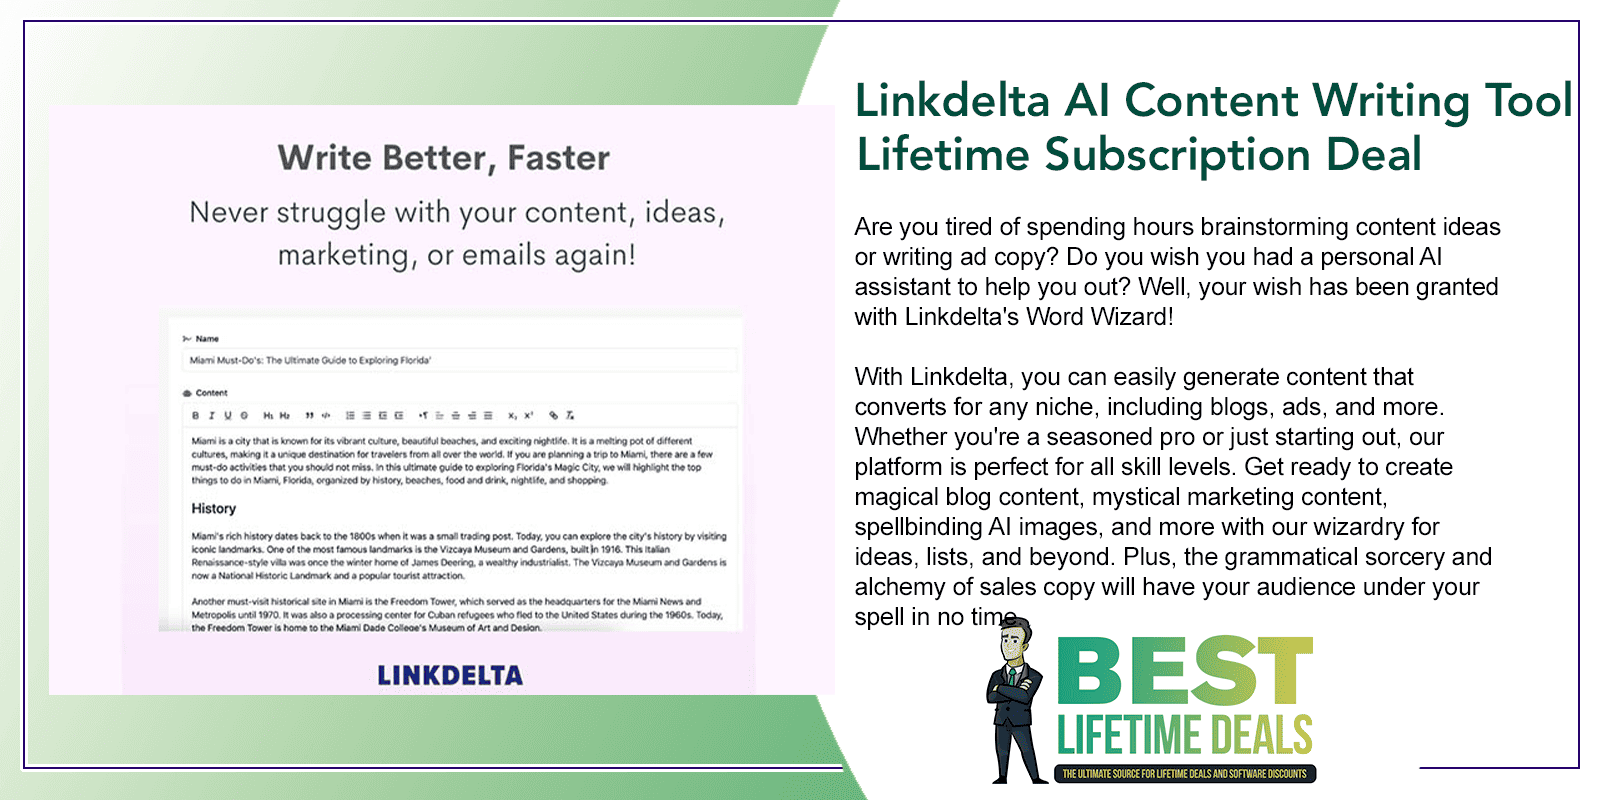 Linkdelta AI Content Writing Tool Lifetime Subscription Deal